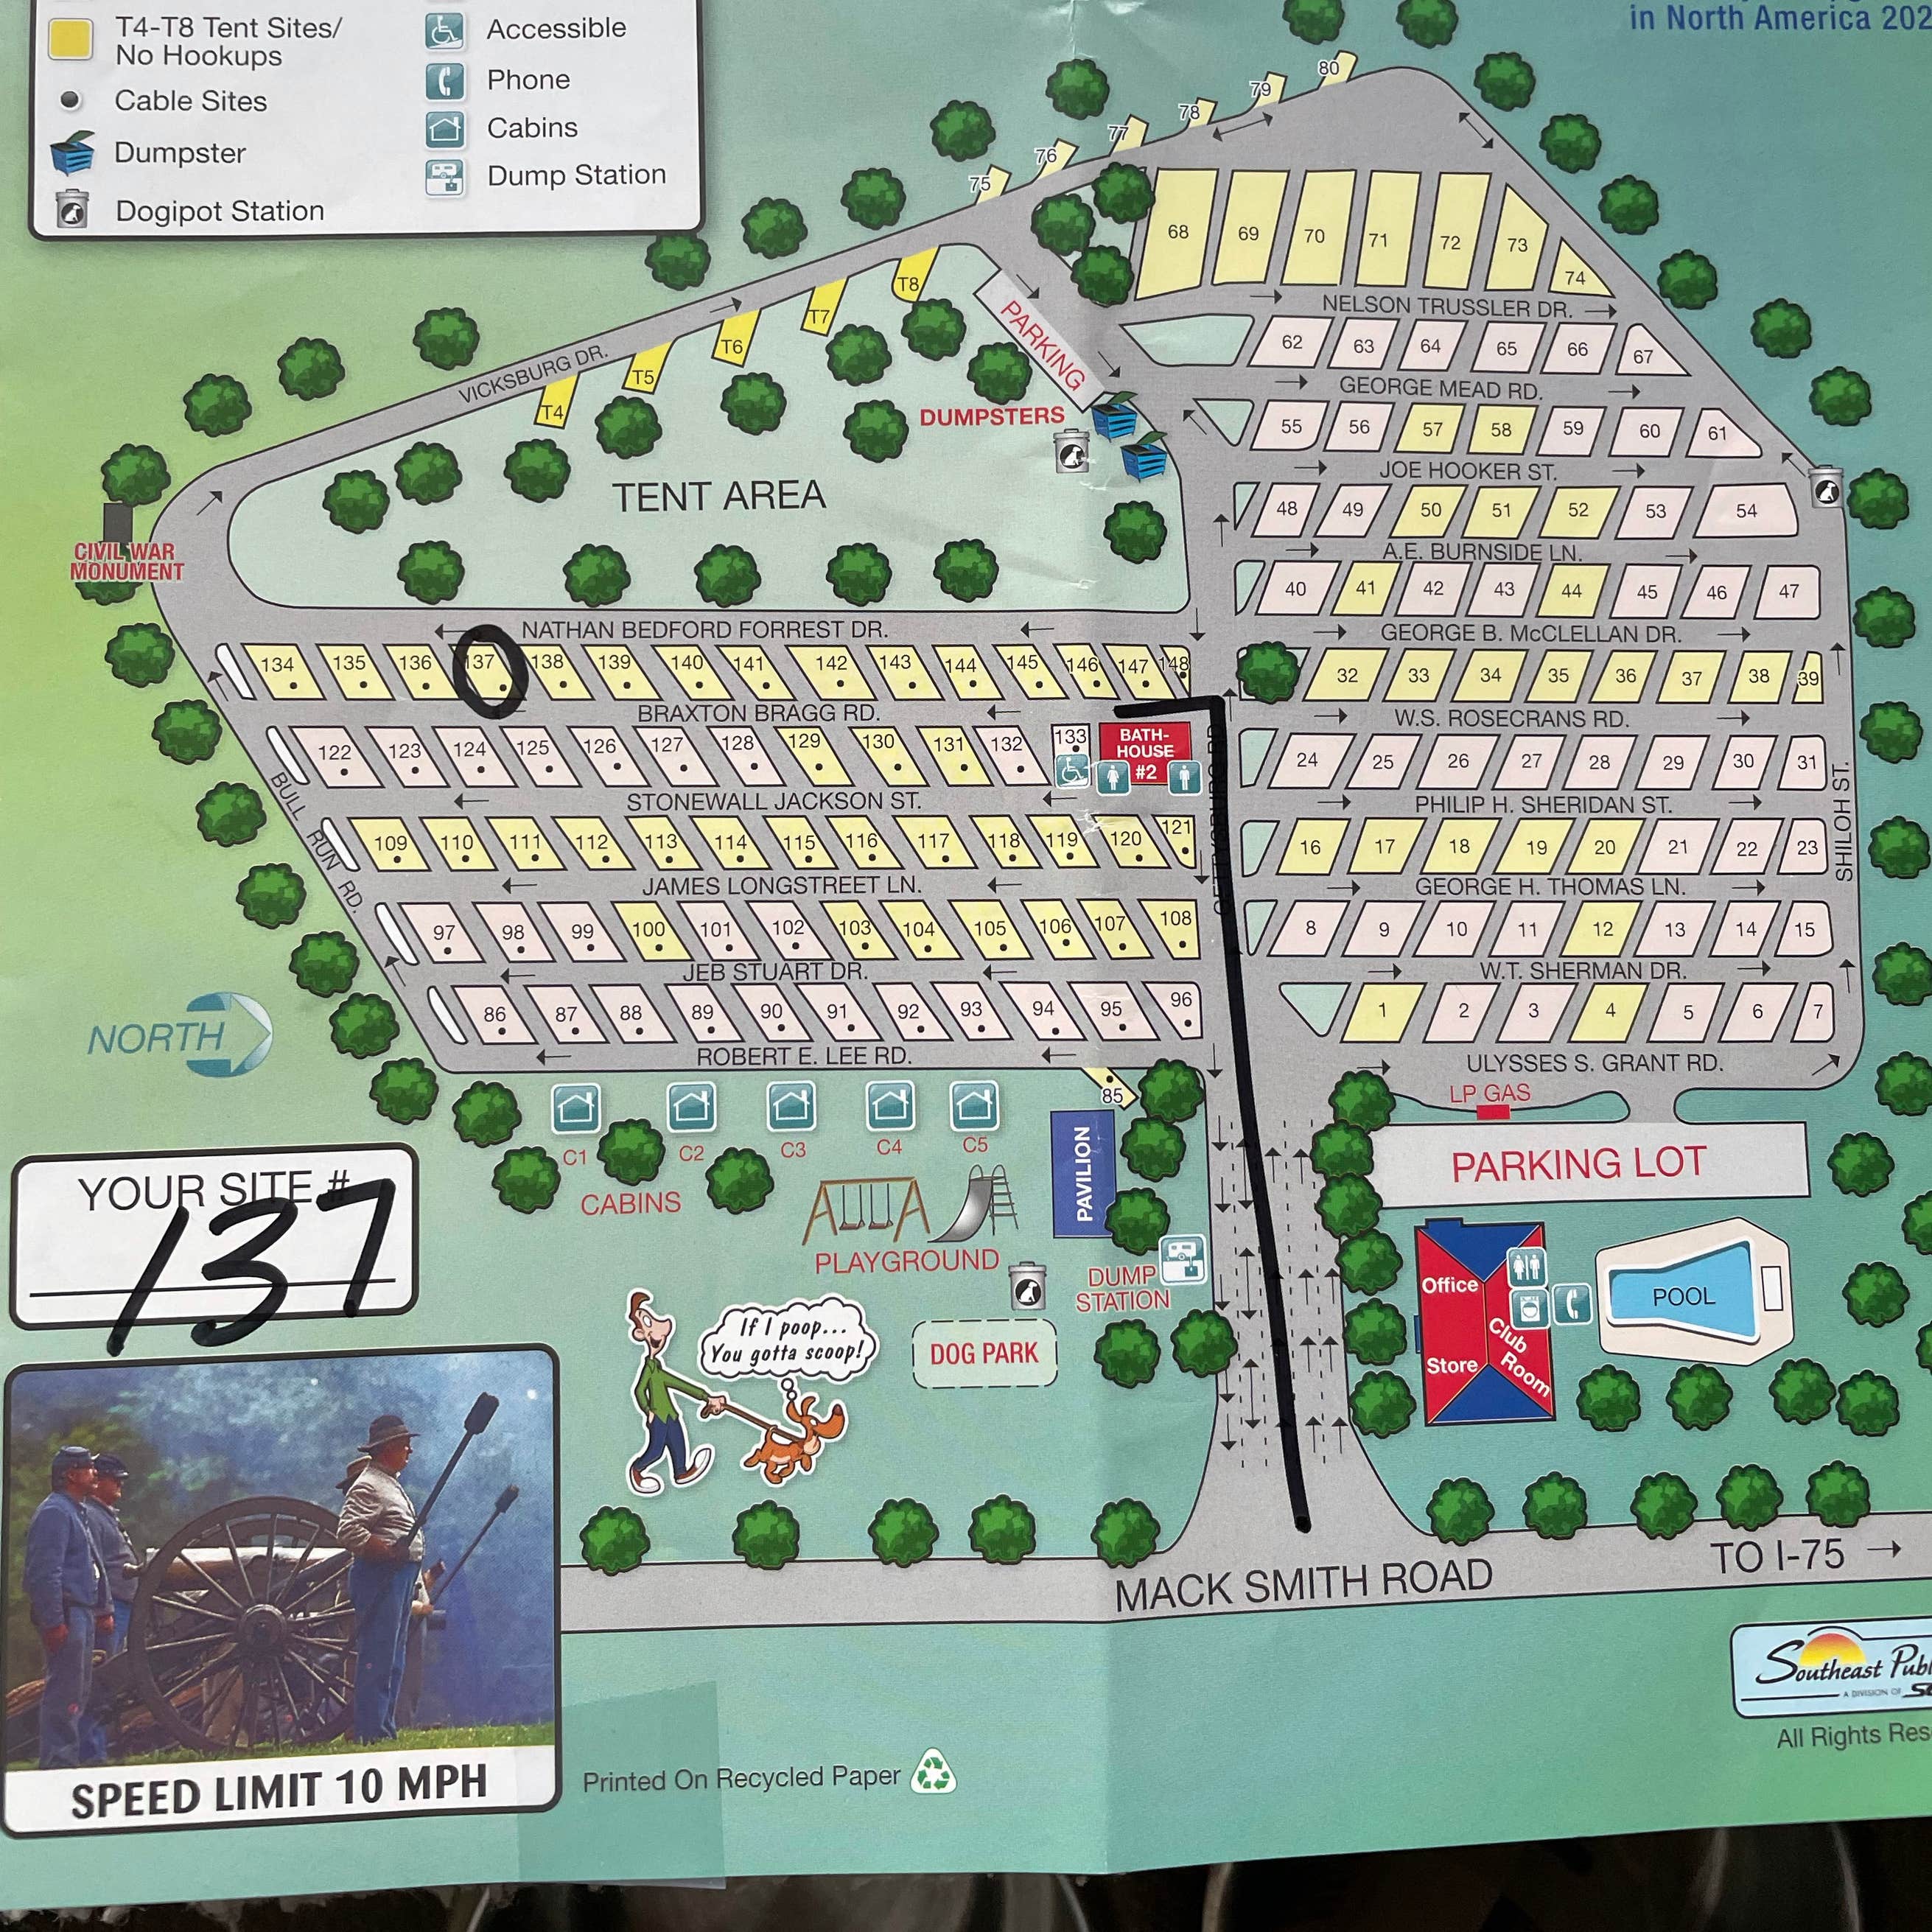 holiday travel park map